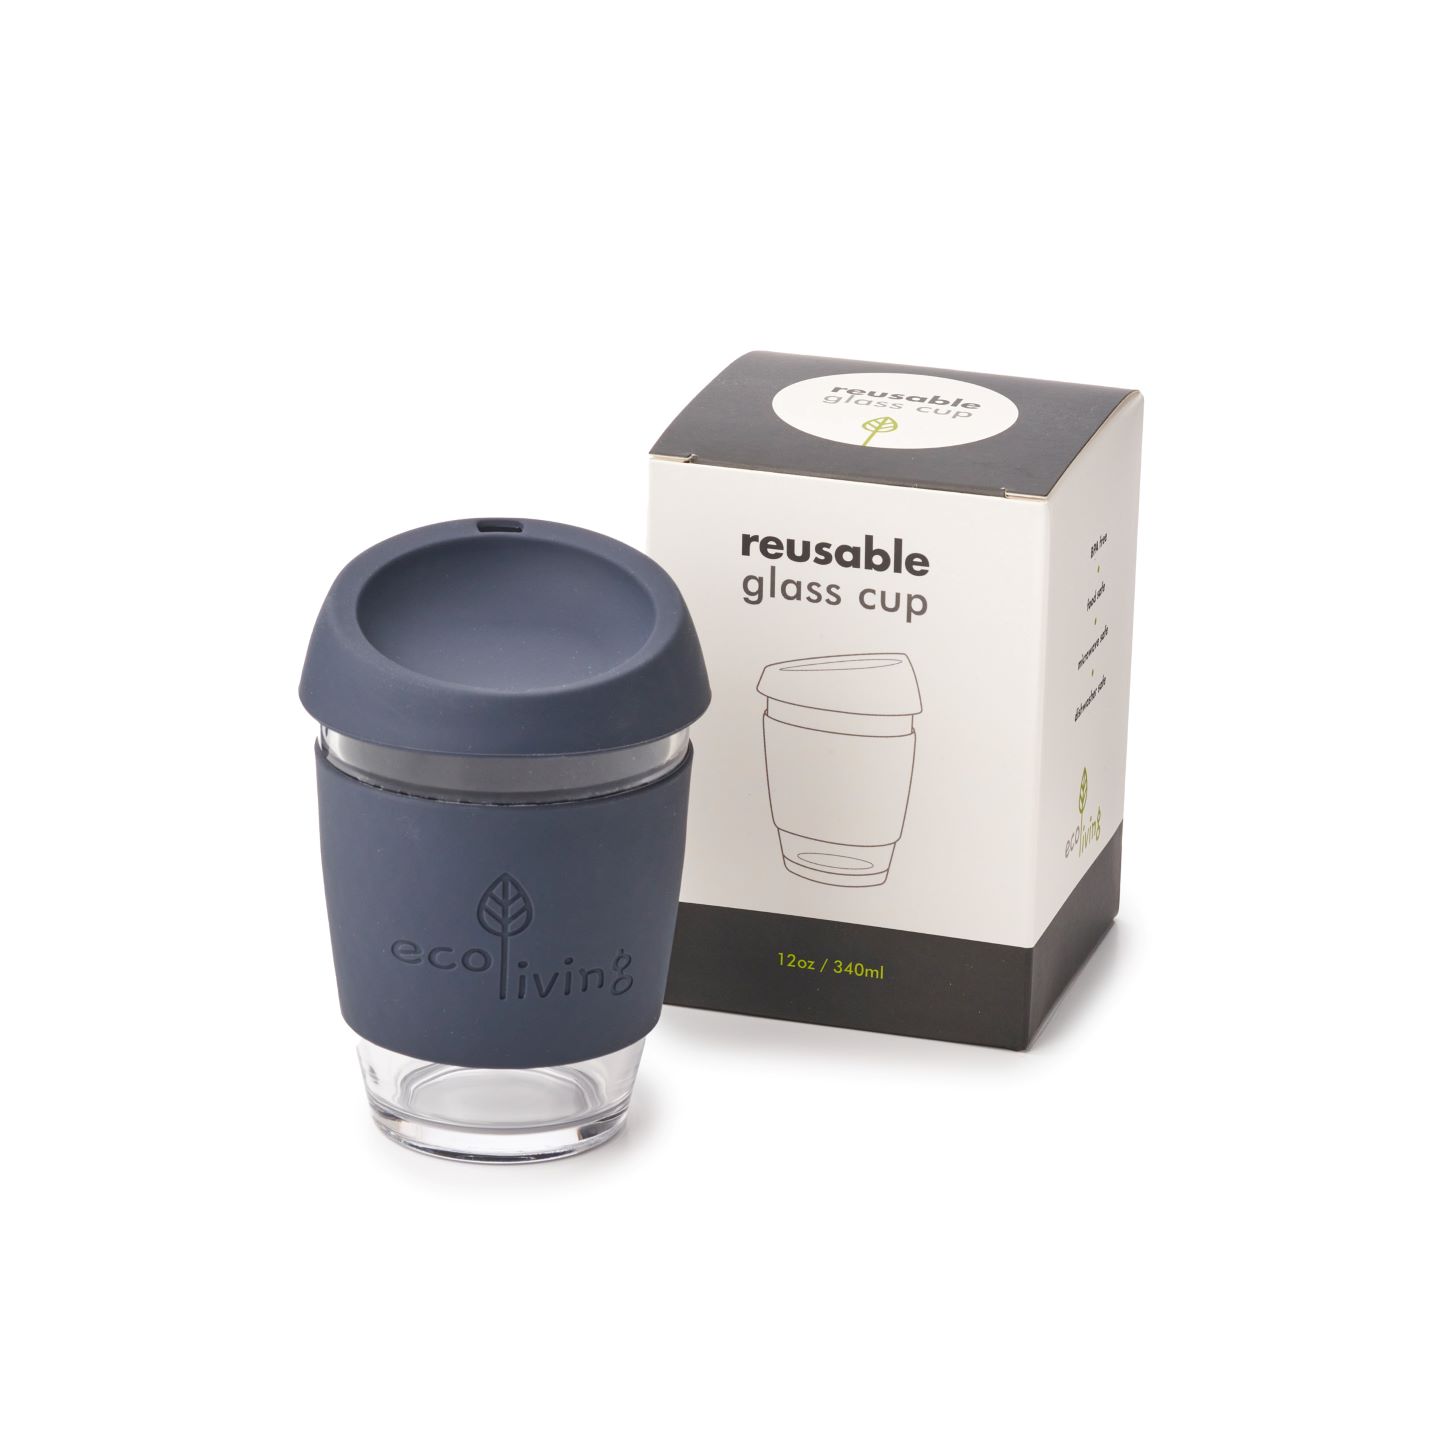 Eco Living Reusable Glass Coffee Cup in Dark Grey